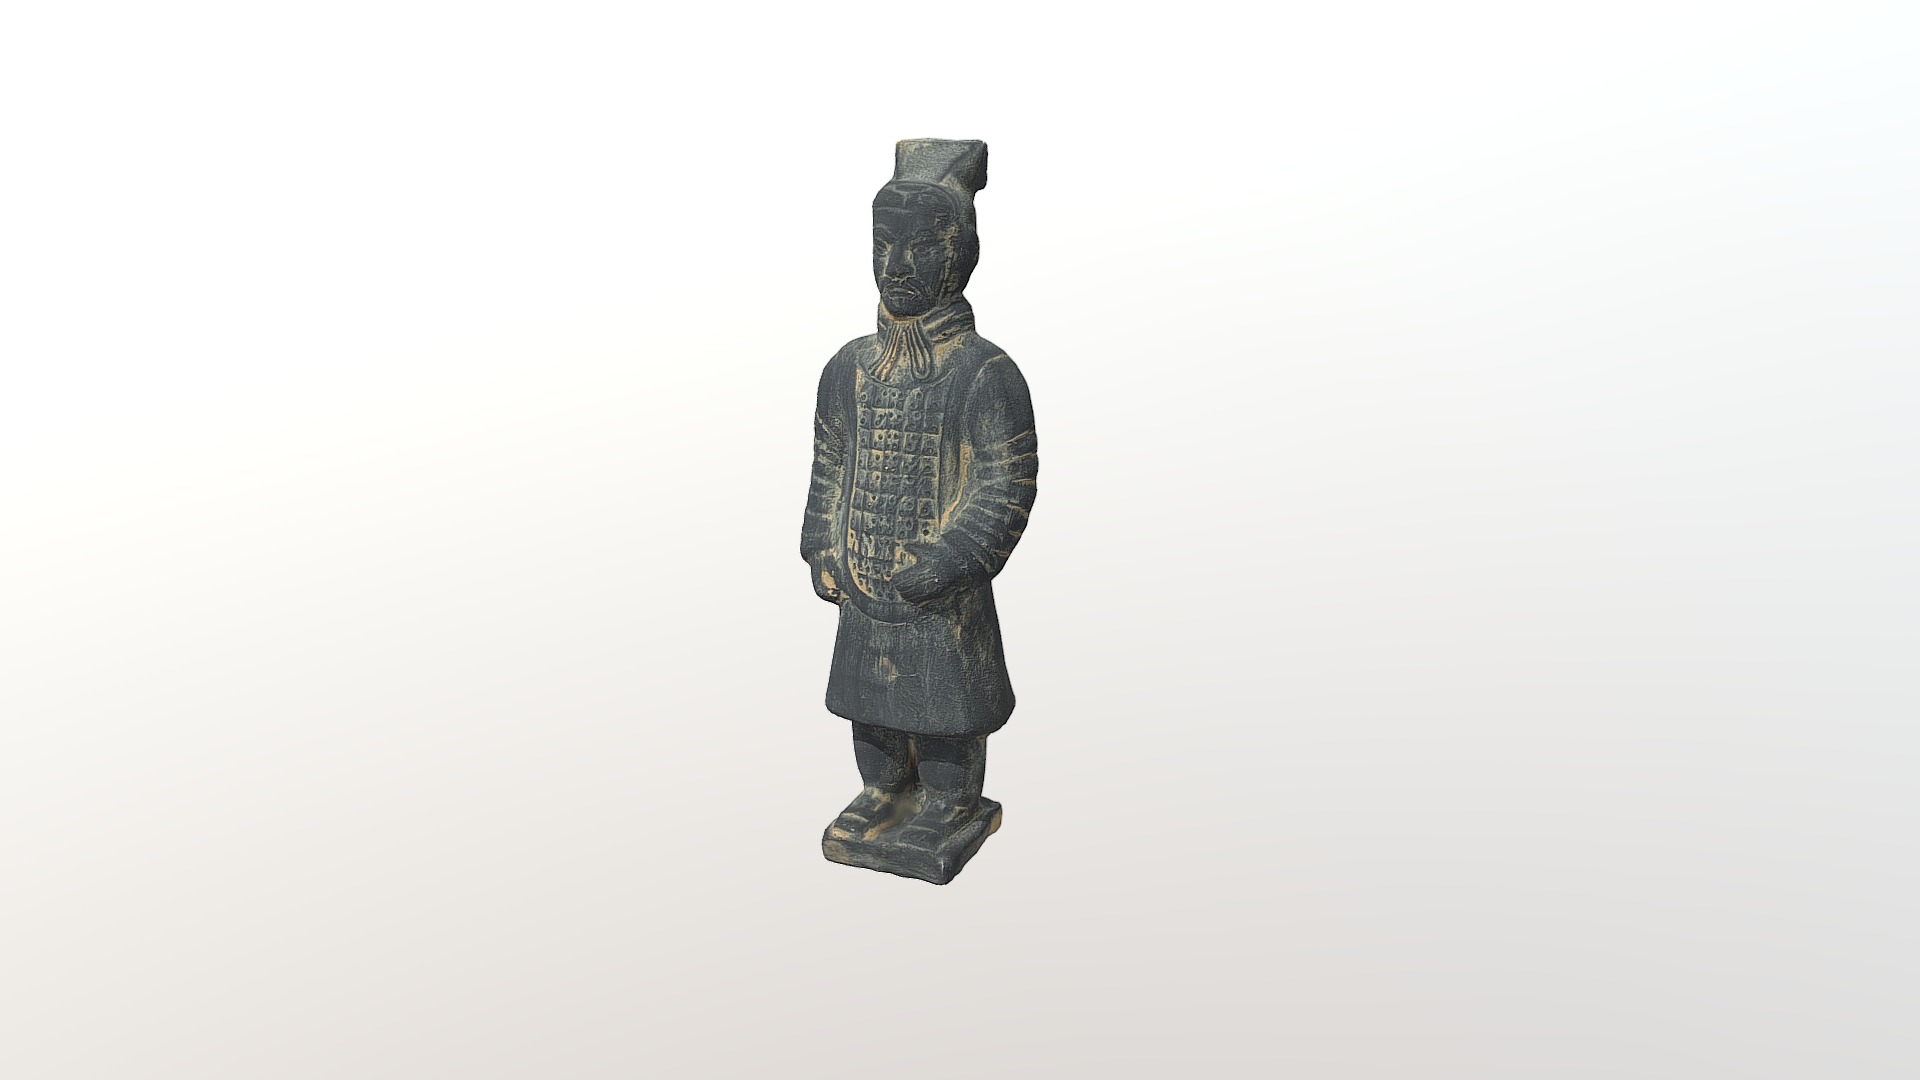 3D model Terracotta Army figurine - This is a 3D model of the Terracotta Army figurine. The 3D model is about a statue of a person.